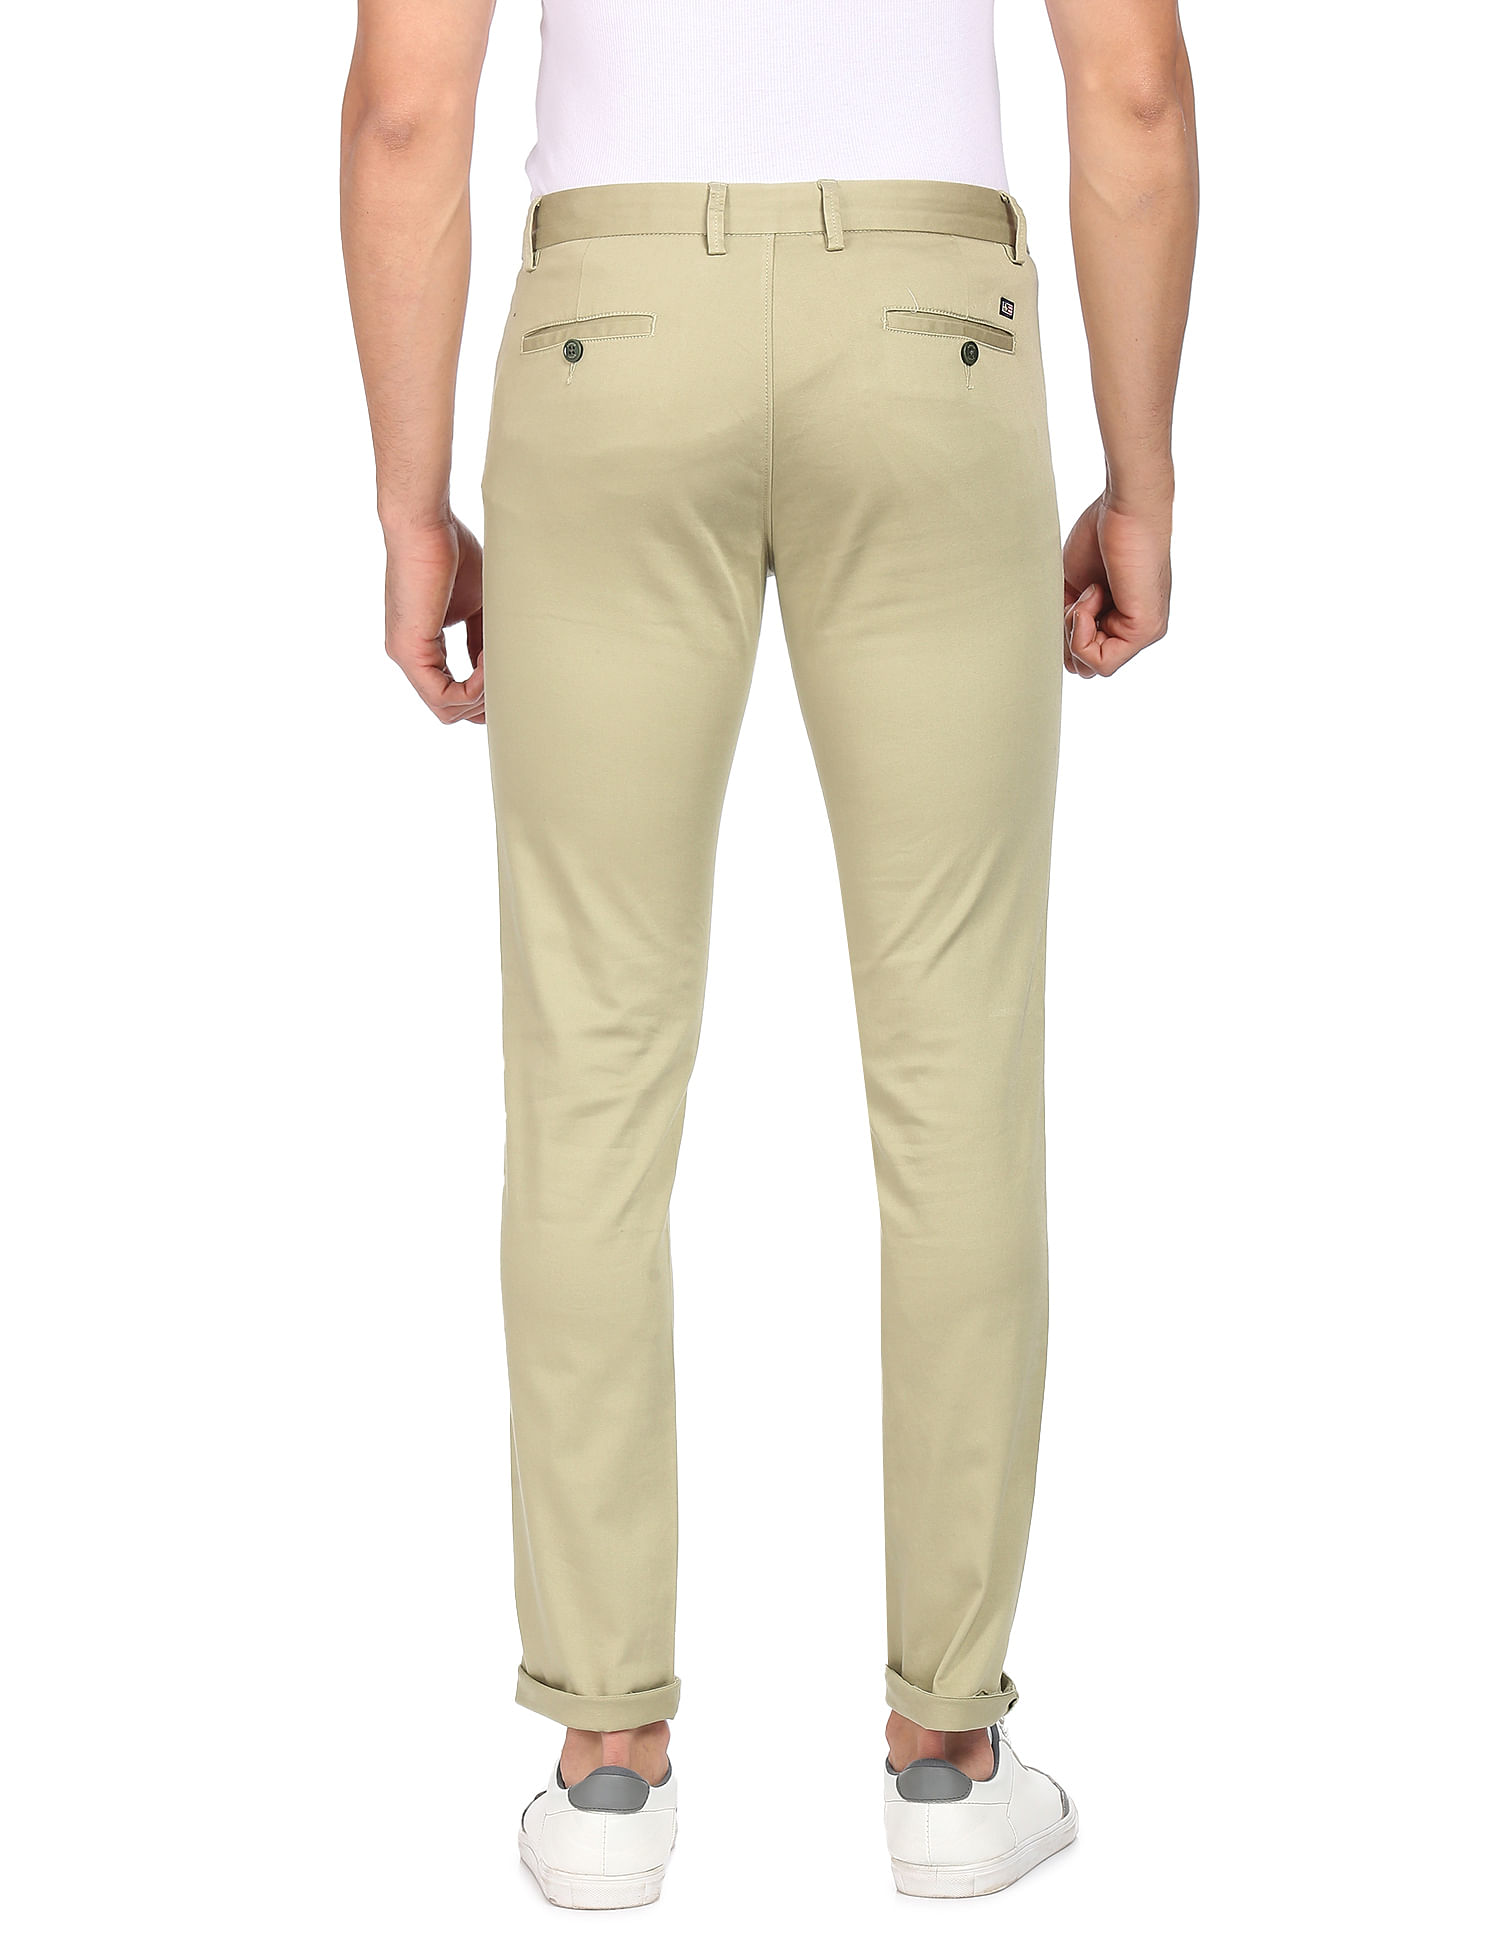 Buy KILLER Men's Trousers Online at Low Prices in India - Paytmmall.com